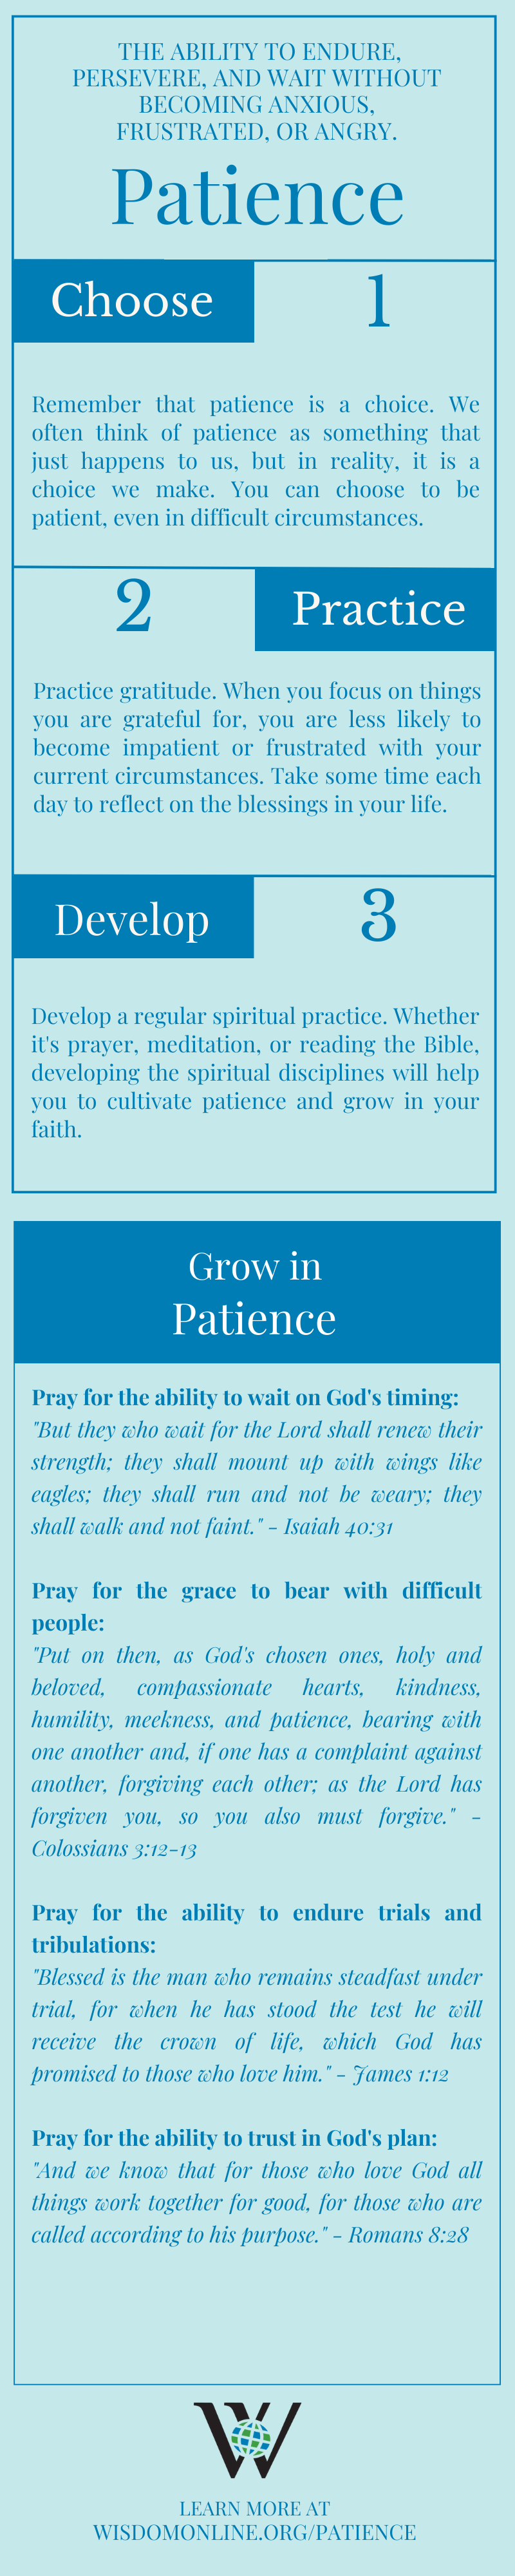 Infographic on Biblical Patience